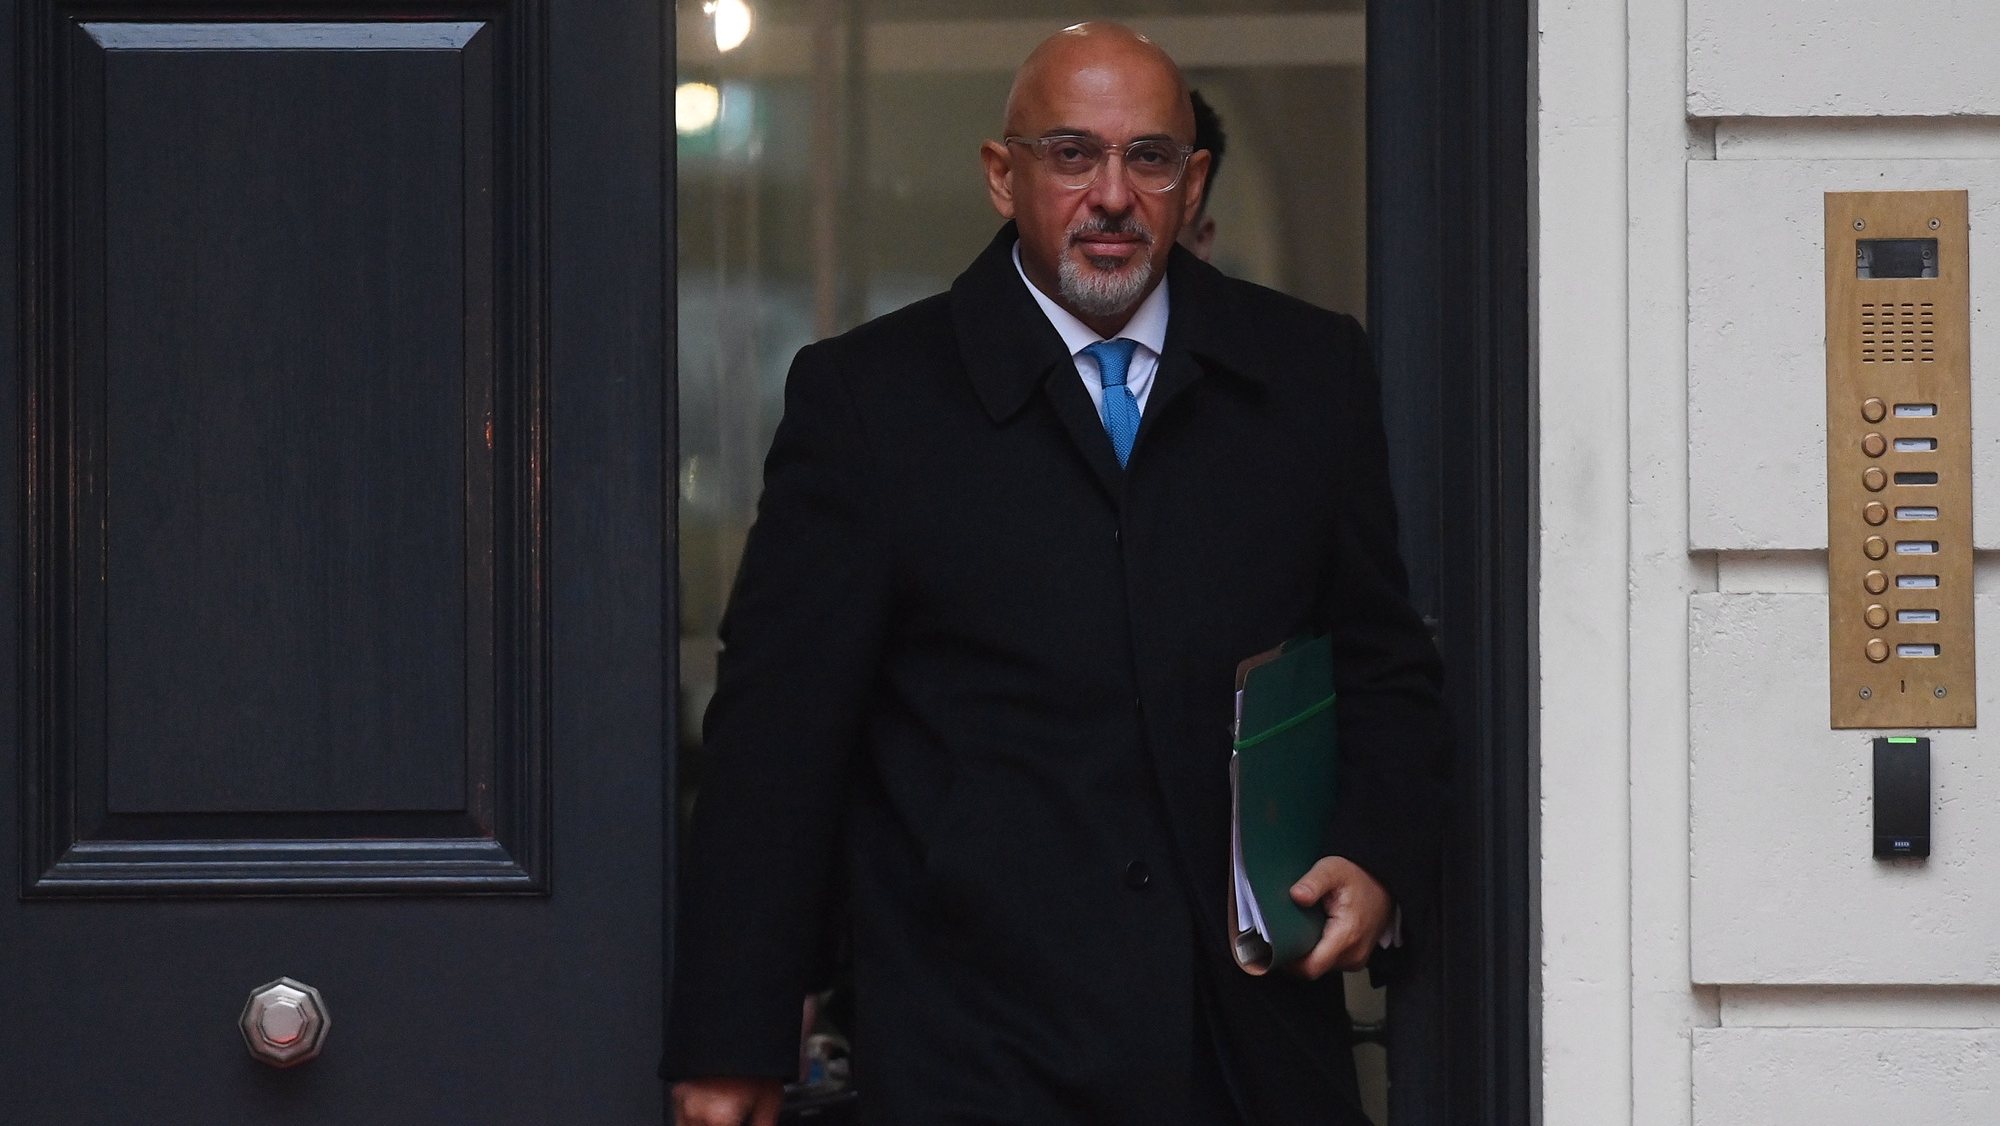 epa10428128 Nadhim Zahawi, Chairman of the Conservative Party, departs Conservative Party Headquarters in London, Britain, 25 January 2023. Zahawi is facing calls to resign following allegations of tax evasion. The British prime minister has ordered an ethics probe into Zahawi&#039;s tax affairs.  EPA/NEIL HALL